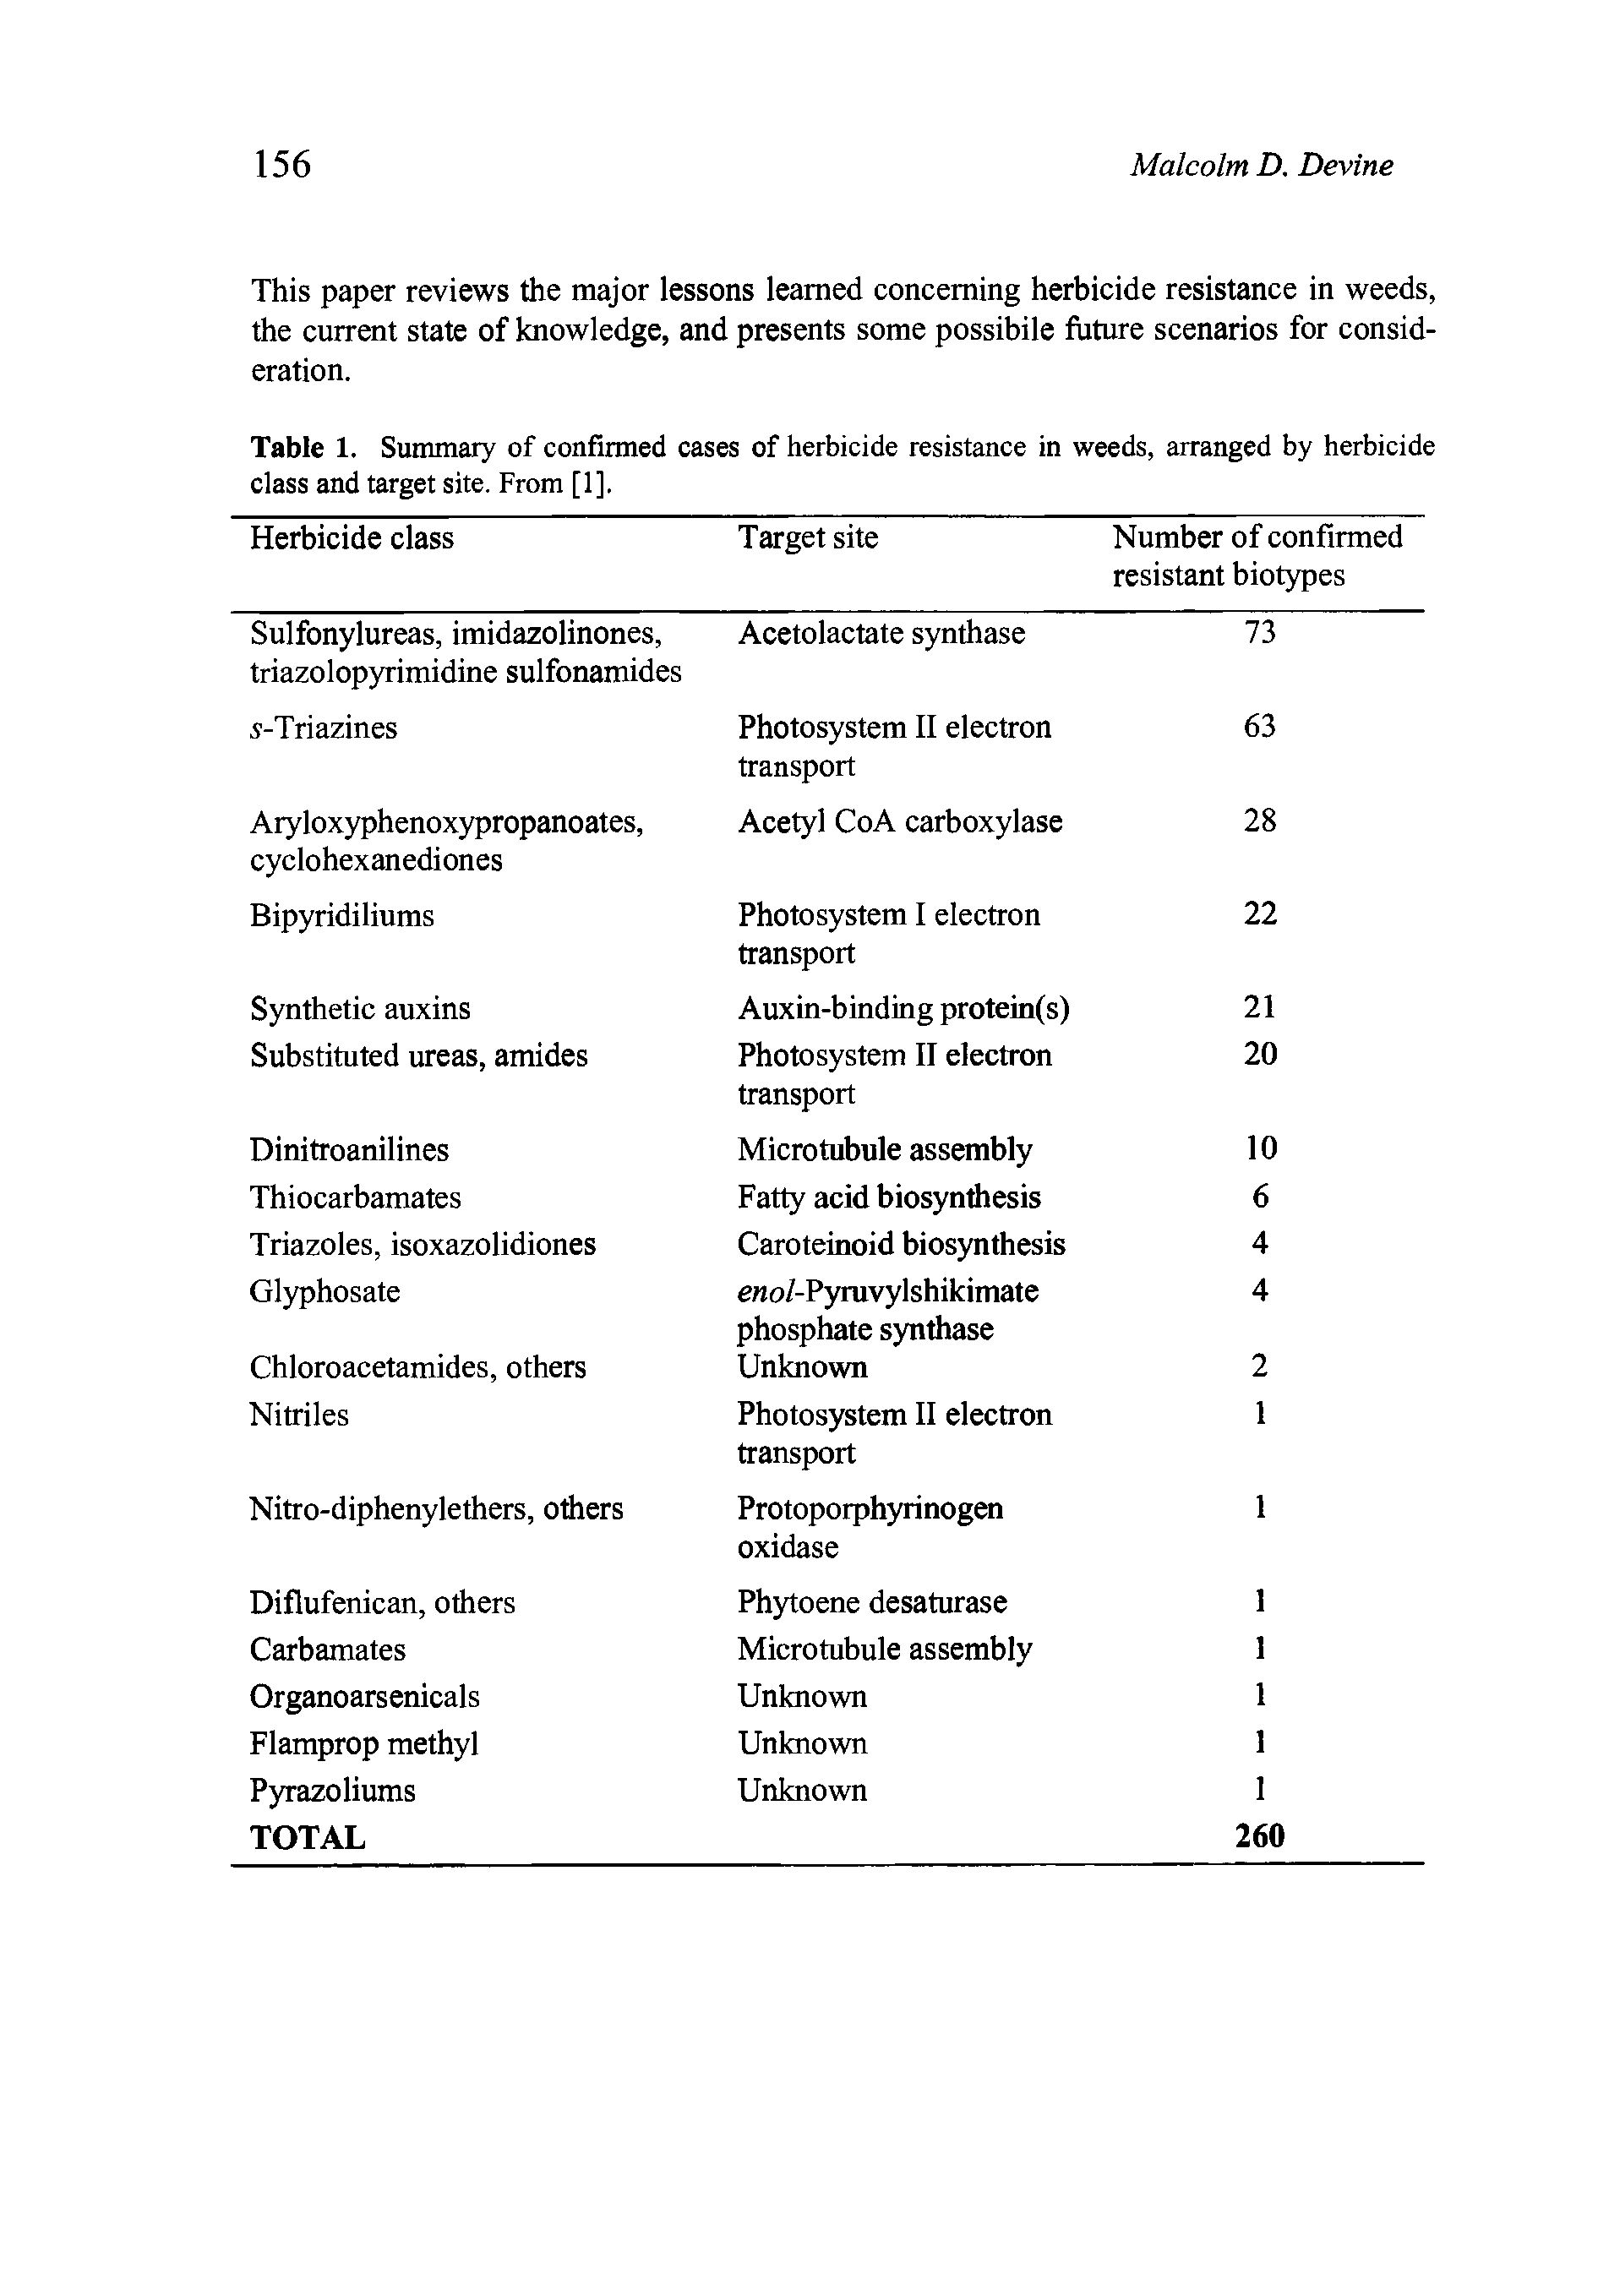 Table 1. Summary of confirmed cases of herbicide resistance in weeds, arranged by herbicide class and target site. From [1].